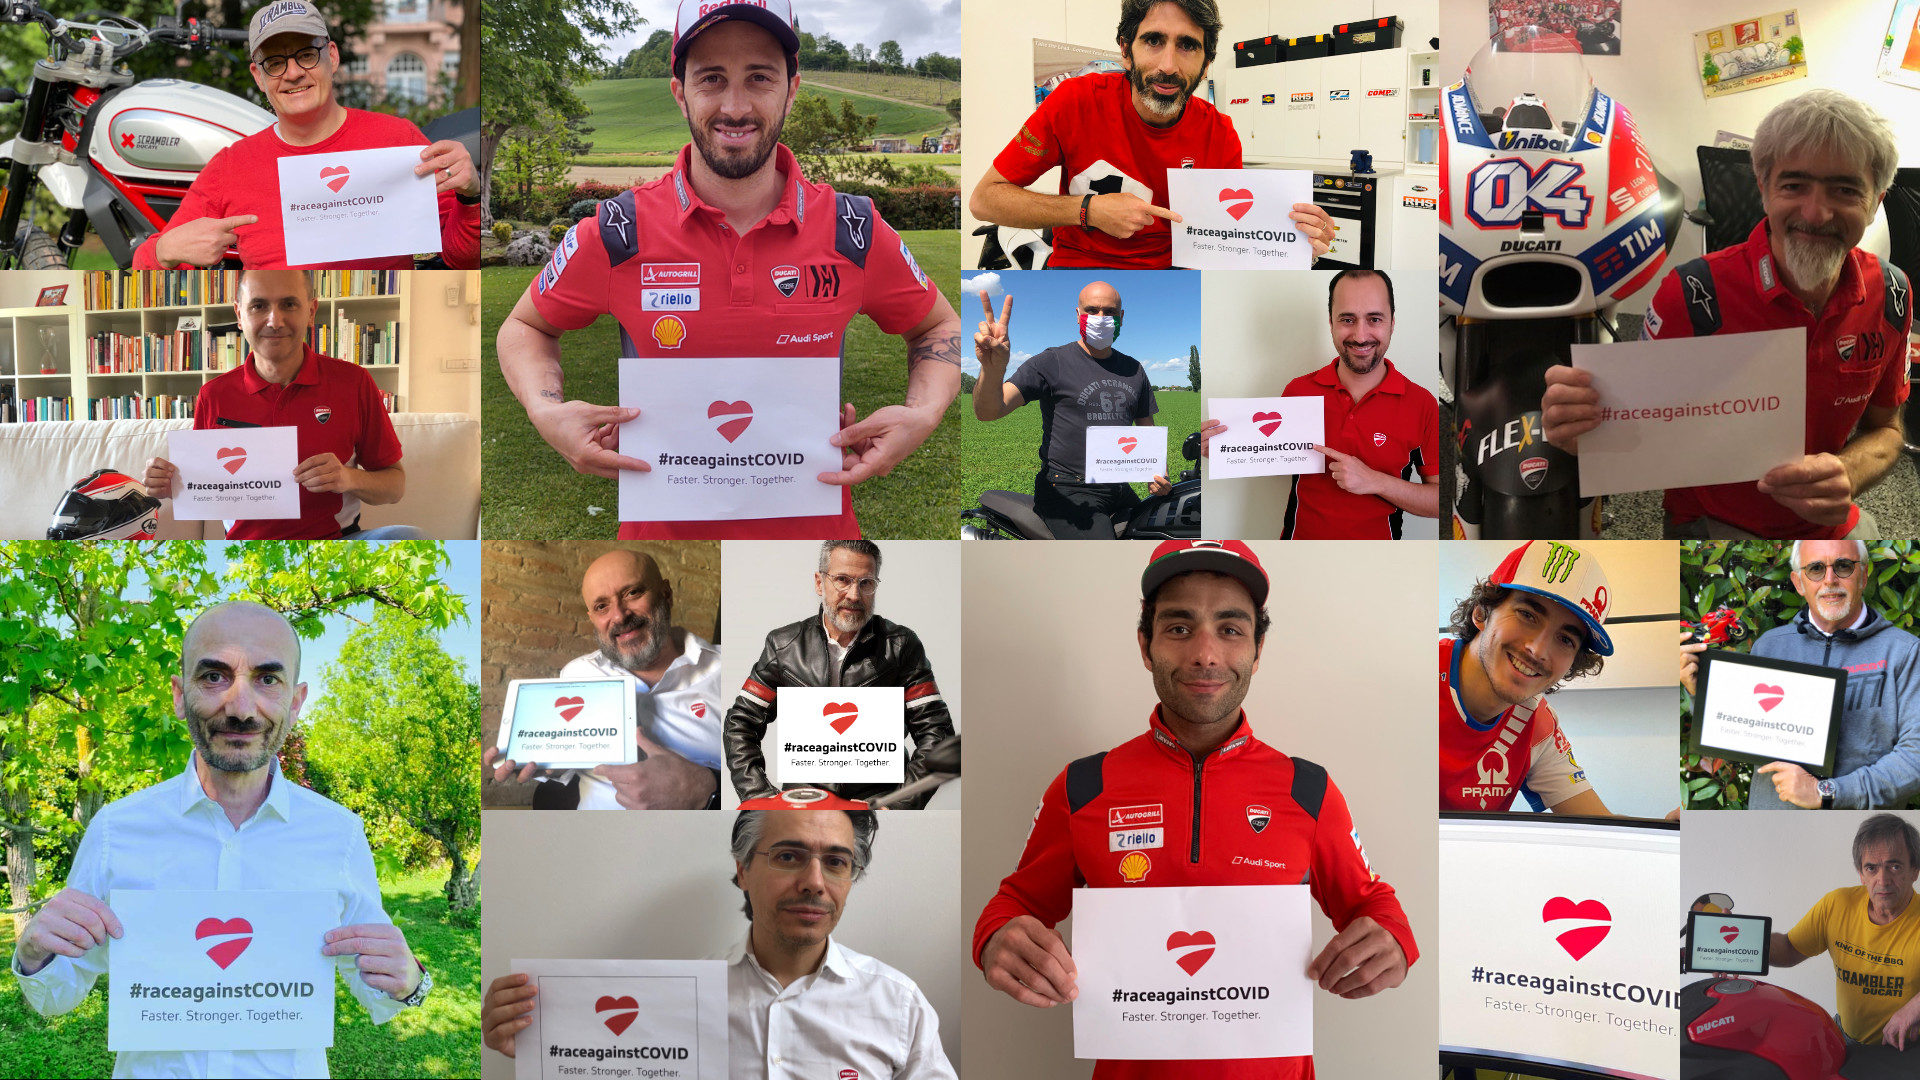 Ducati and its employees have launched a fundraiser to support patients recovering from COVID-19. Image courtesy of Ducati.